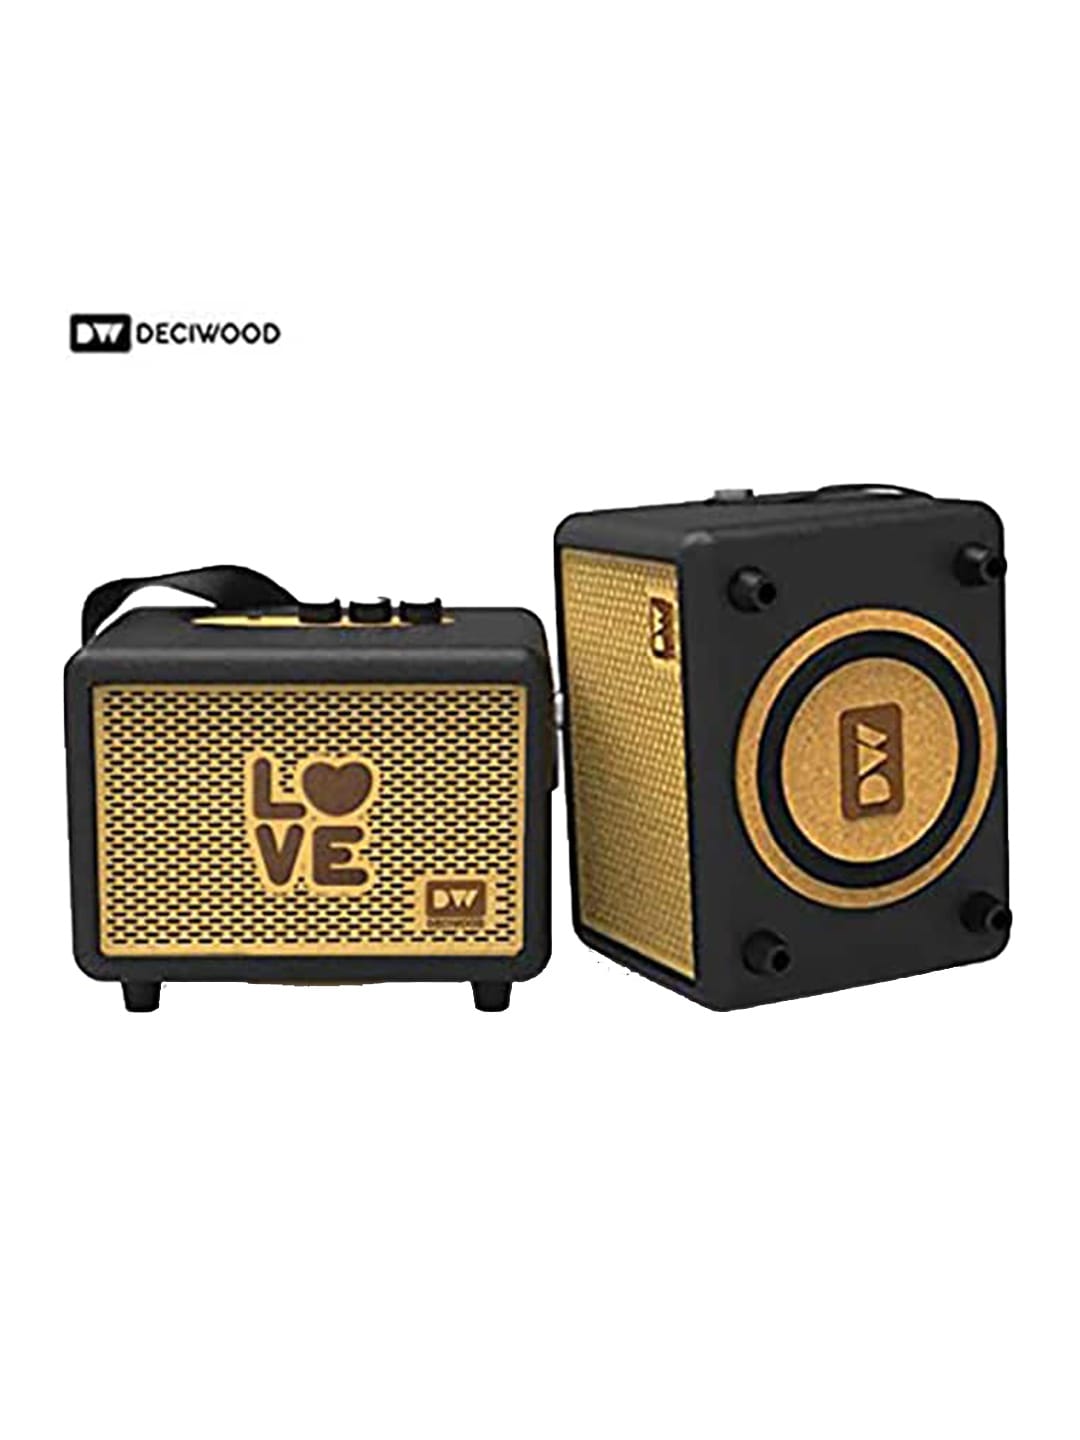 DECIWOOD Black & Yellow Unplugged 35W Wooden Potable Bluetooth Speakers Price in India